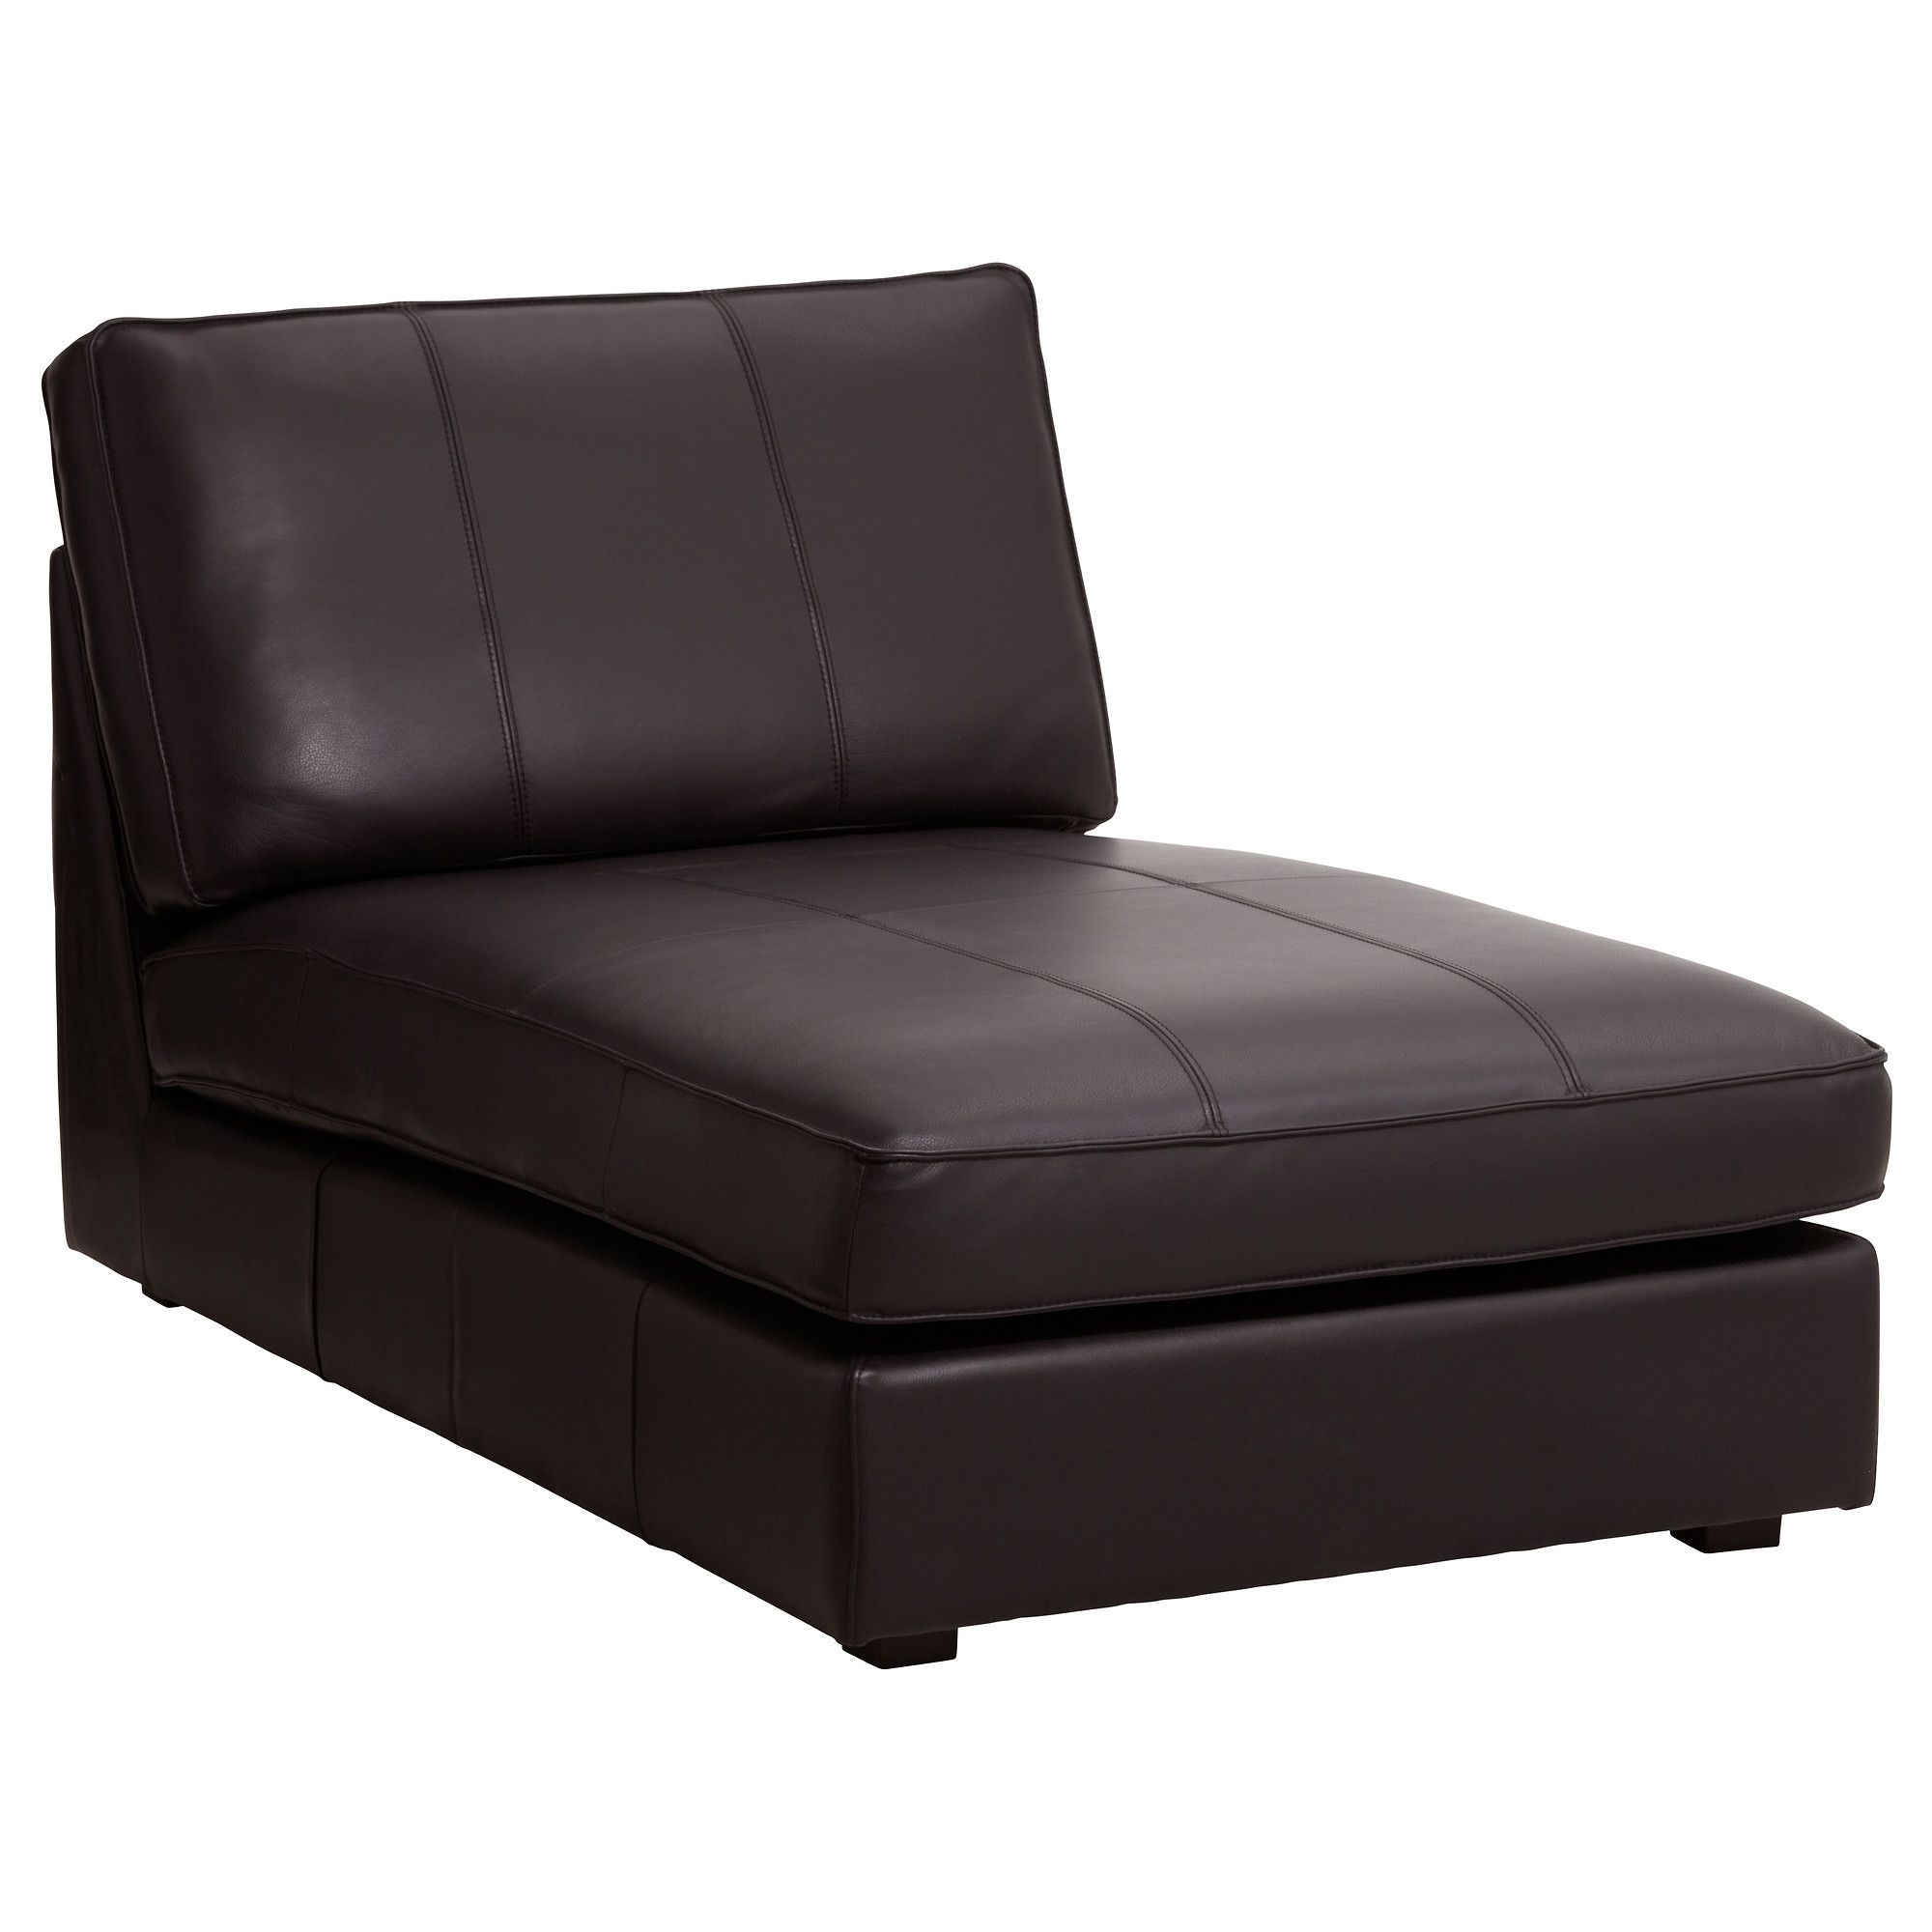 Newest Ikea Chaise Lounge Chairs Intended For Kivik Chaise – Grann/bomstad Dark Brown – Ikea (View 1 of 15)